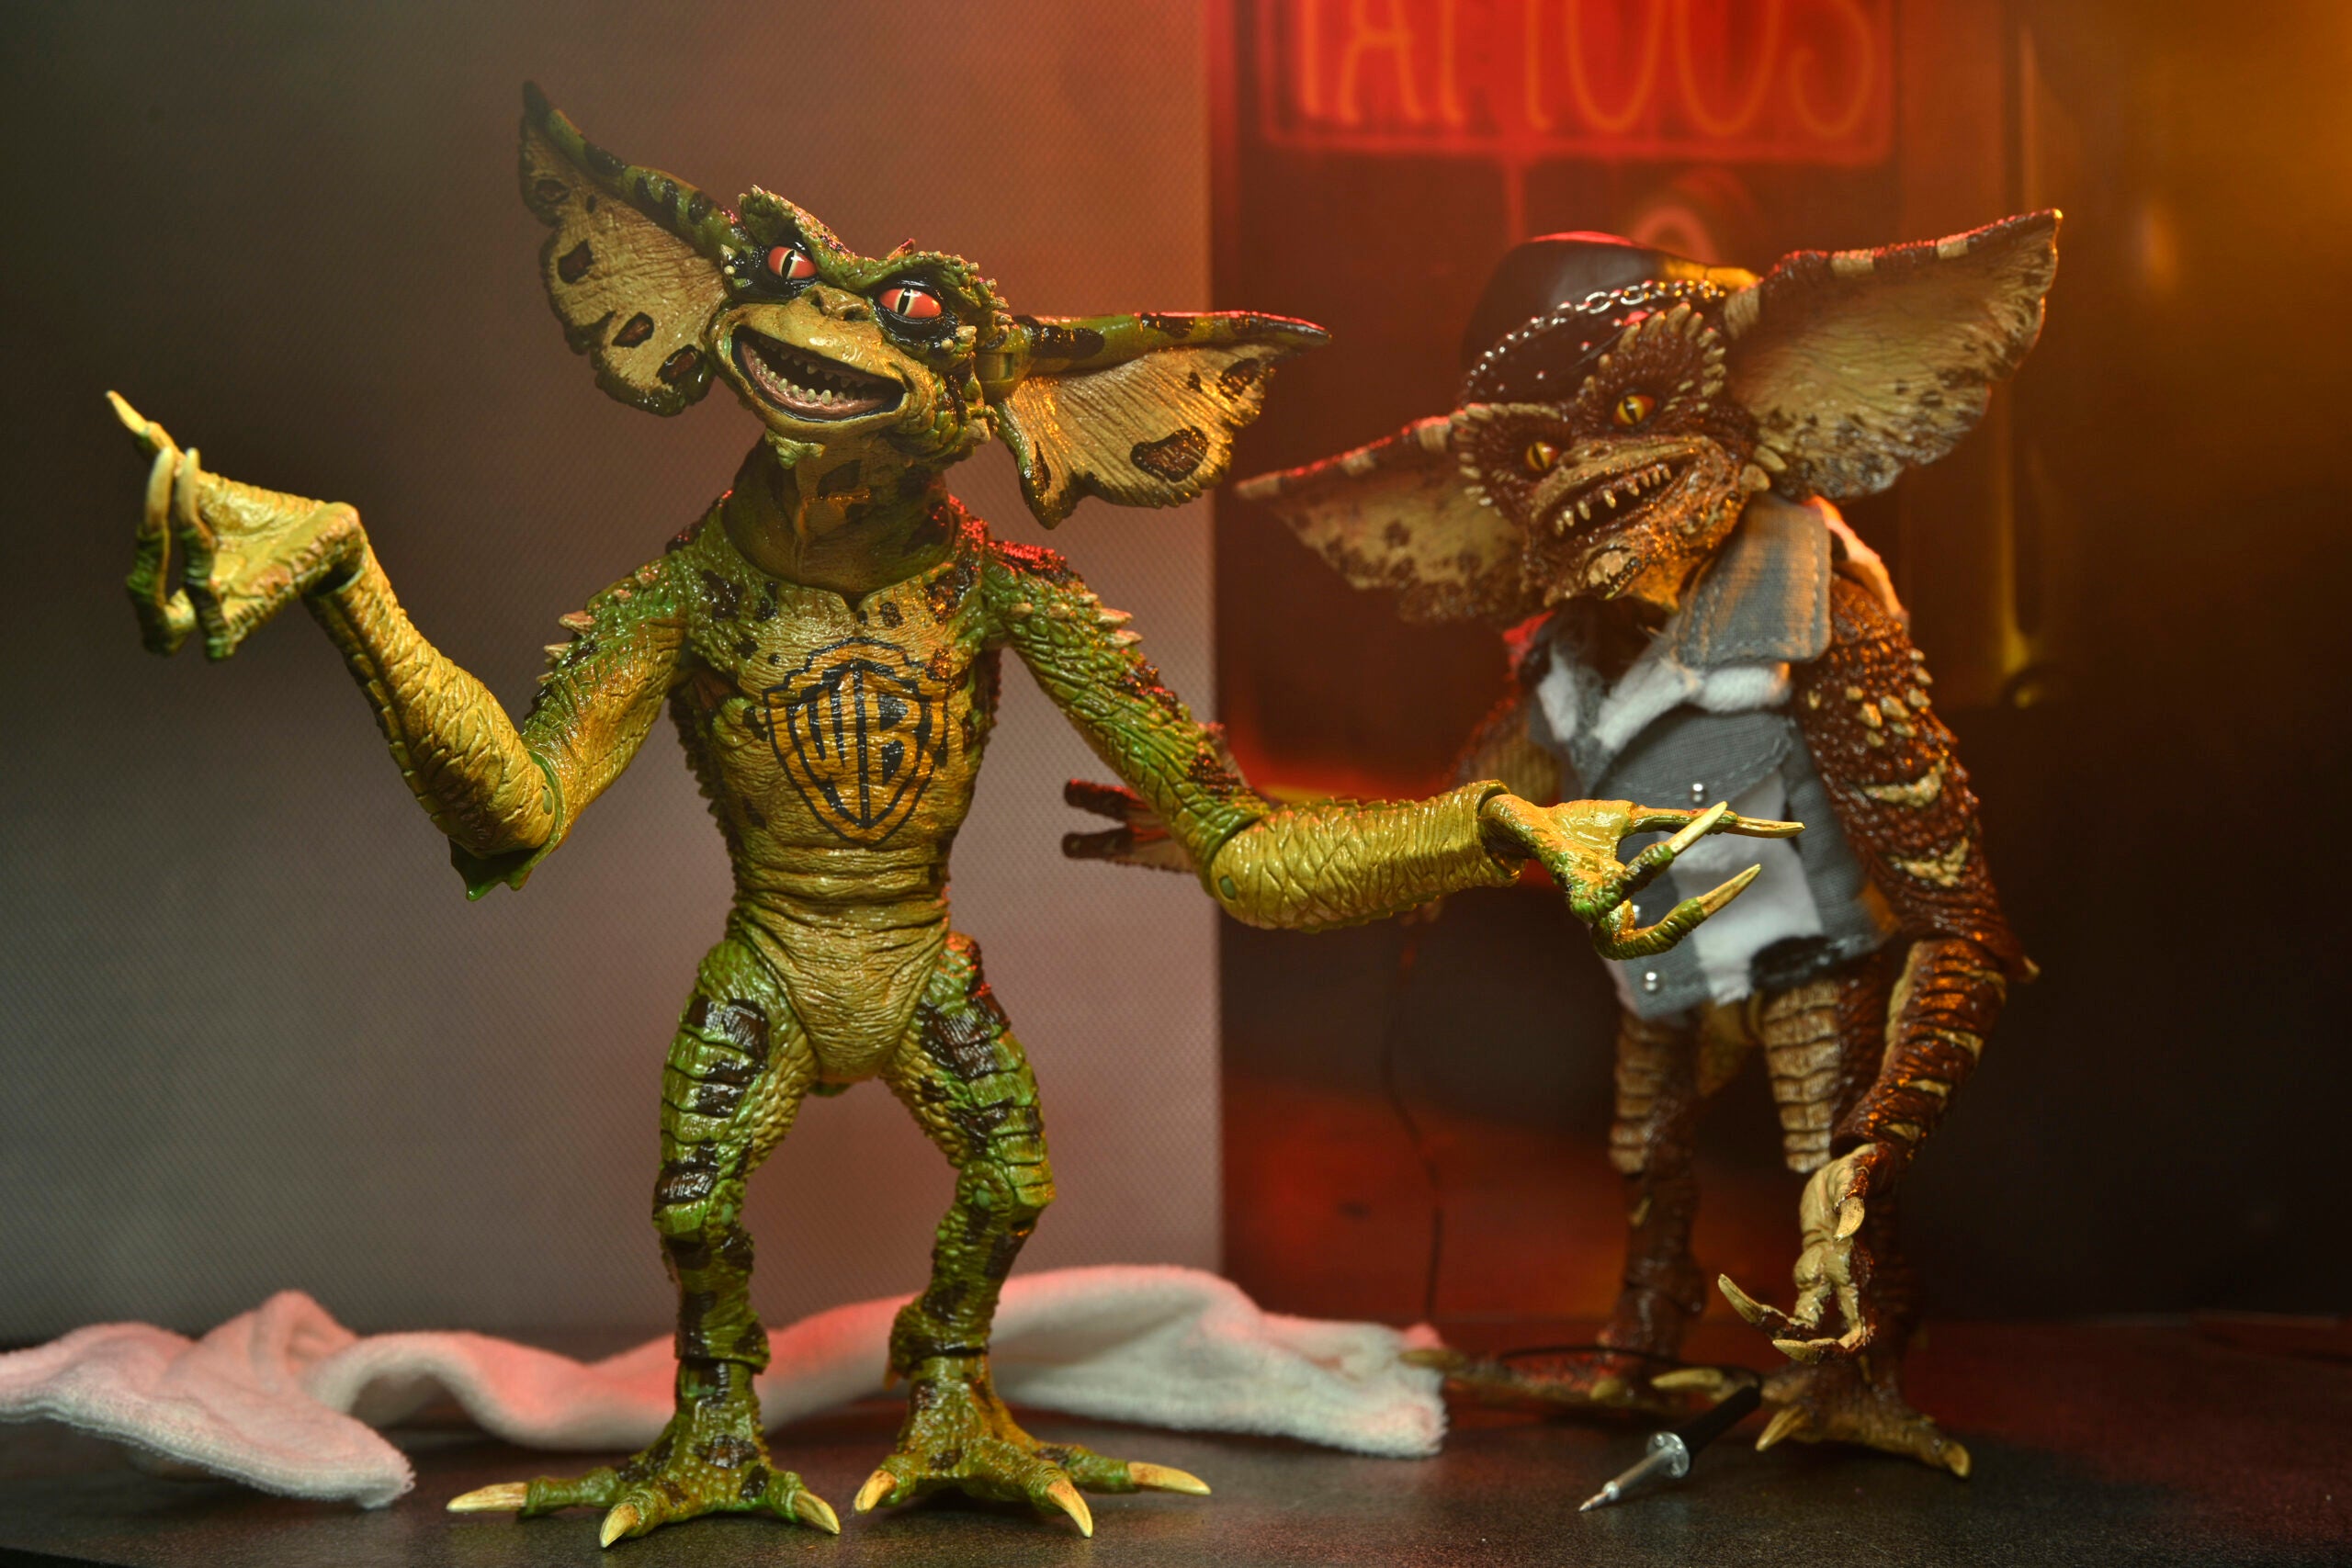 Neca - Gremlins 2: The New Batch - Tattoo Gremlins Two-Pack - Marvelous Toys